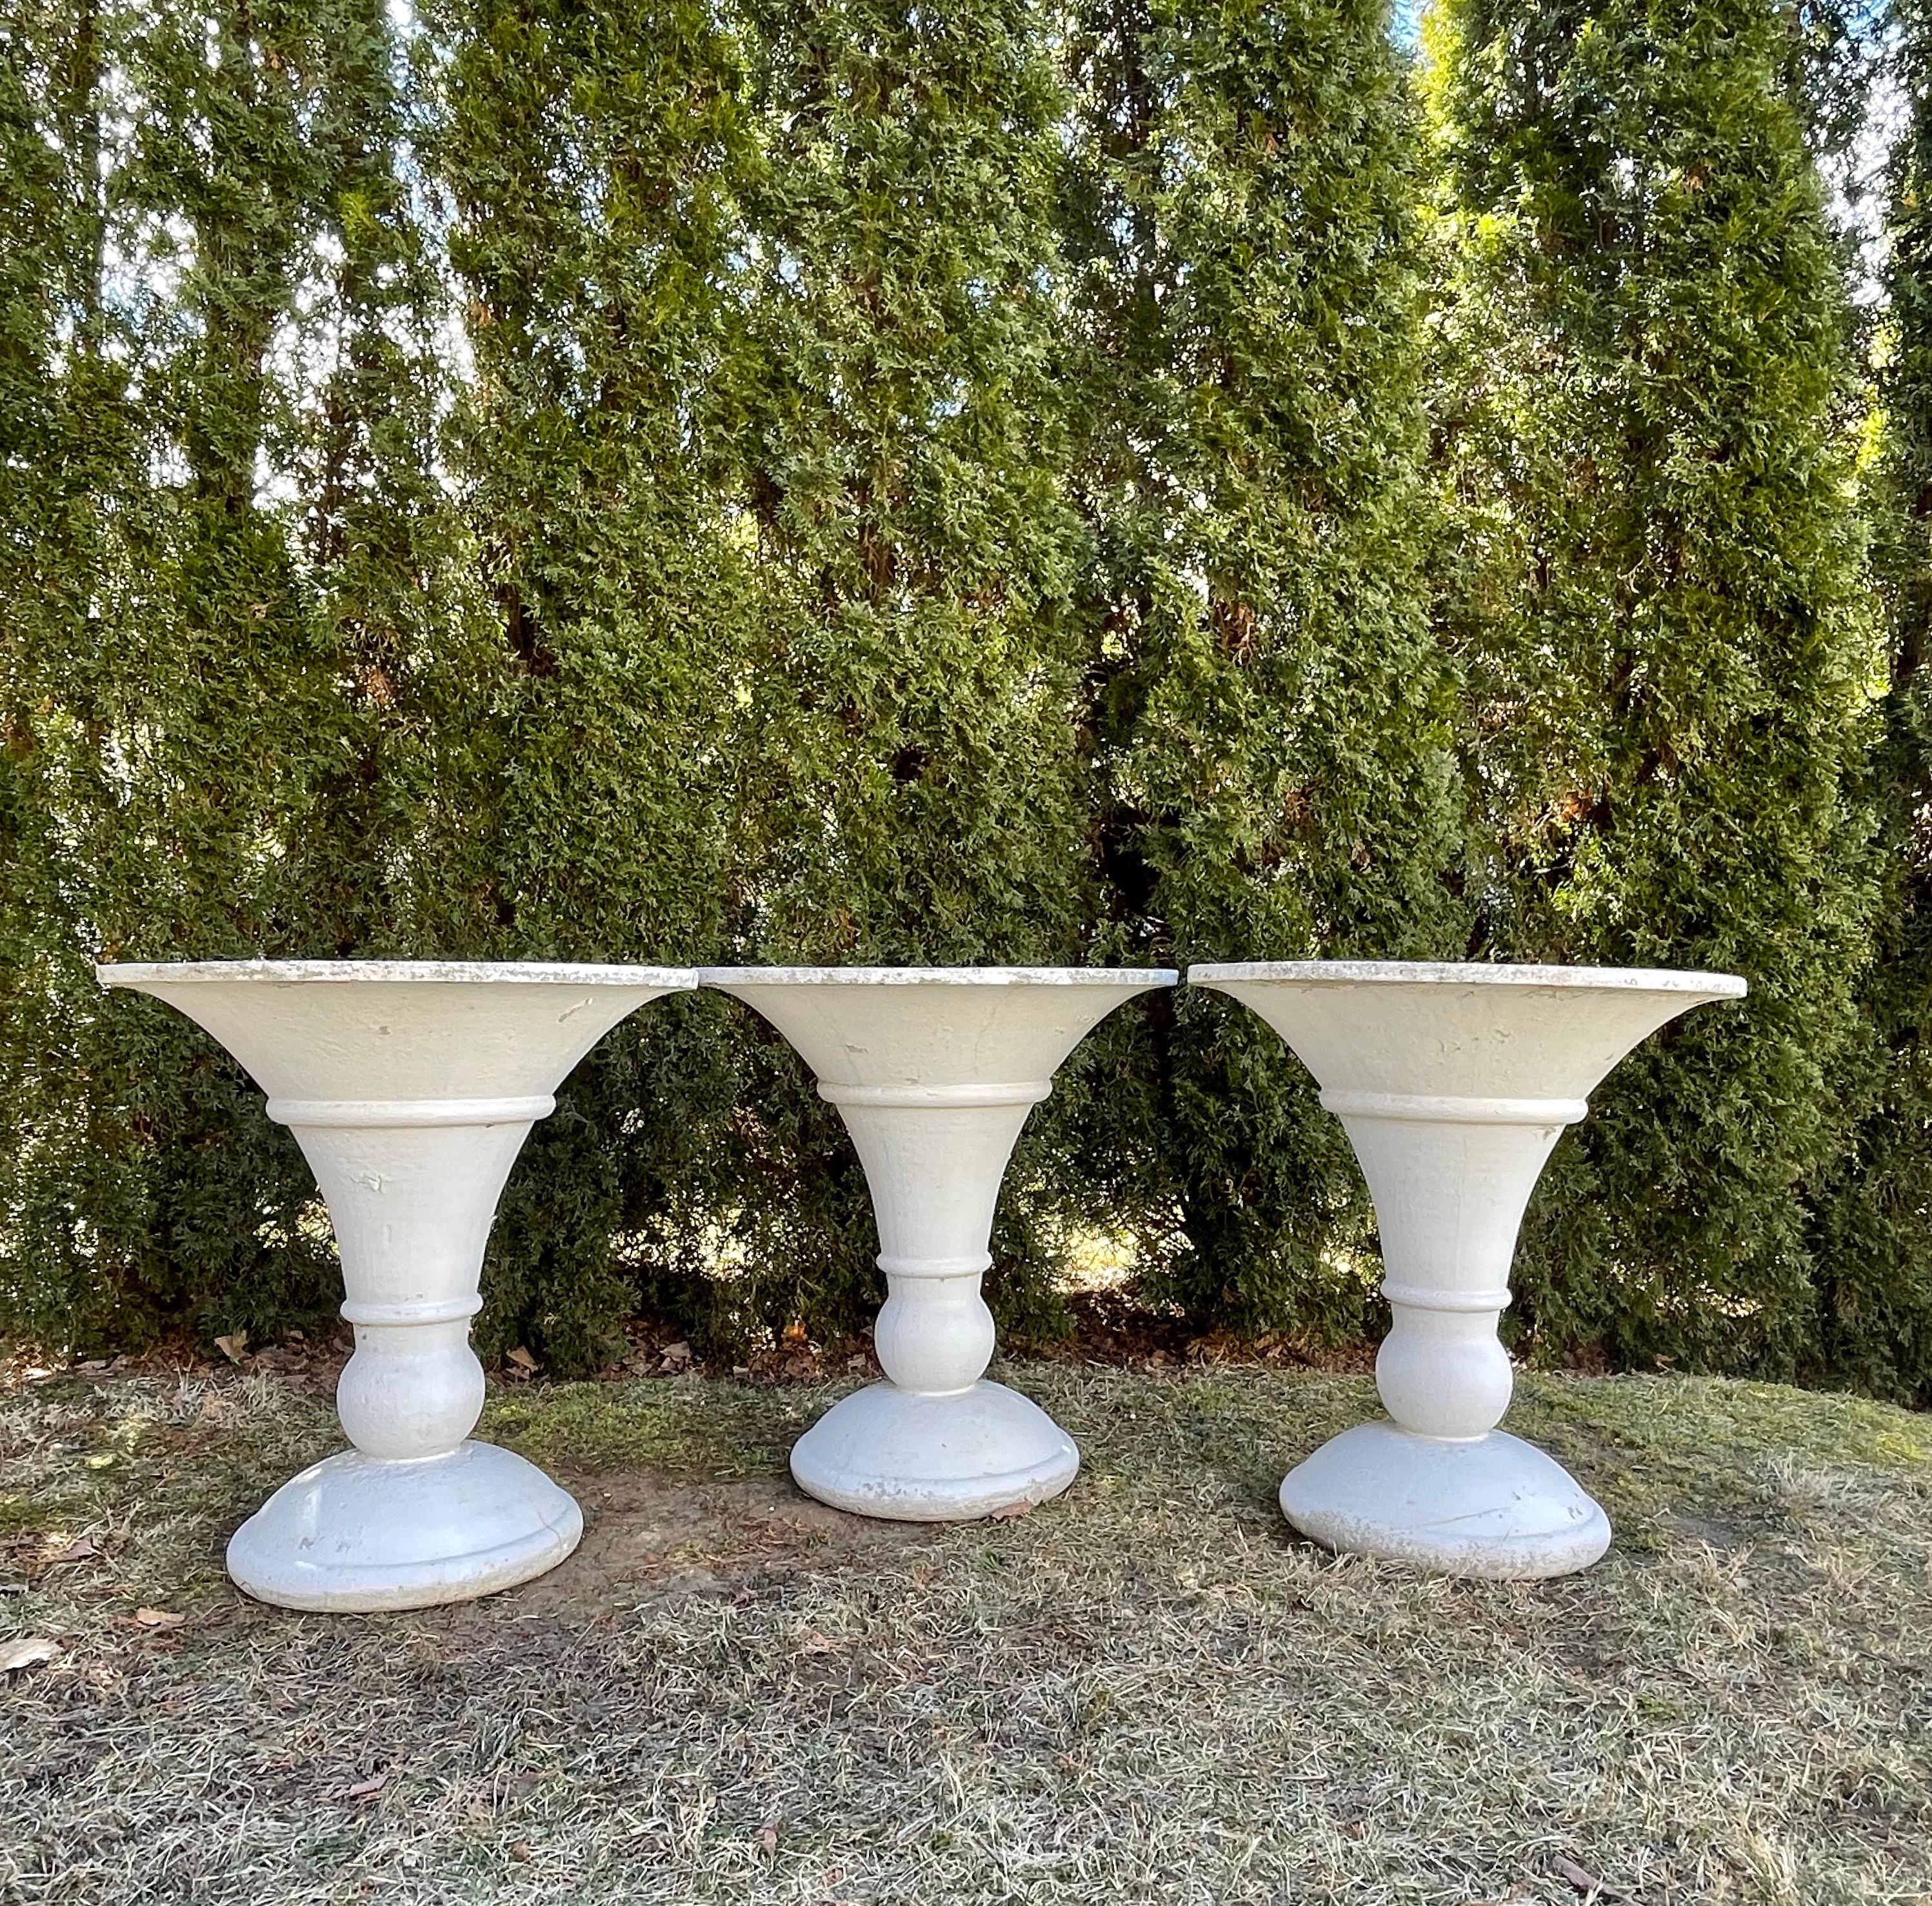 The form of these heavy cast stone planters is so elegant and the planting wells so capacious that you will find so many places to use these in your garden. Art Deco in style, they go with everything and will give you decades of pleasure. We